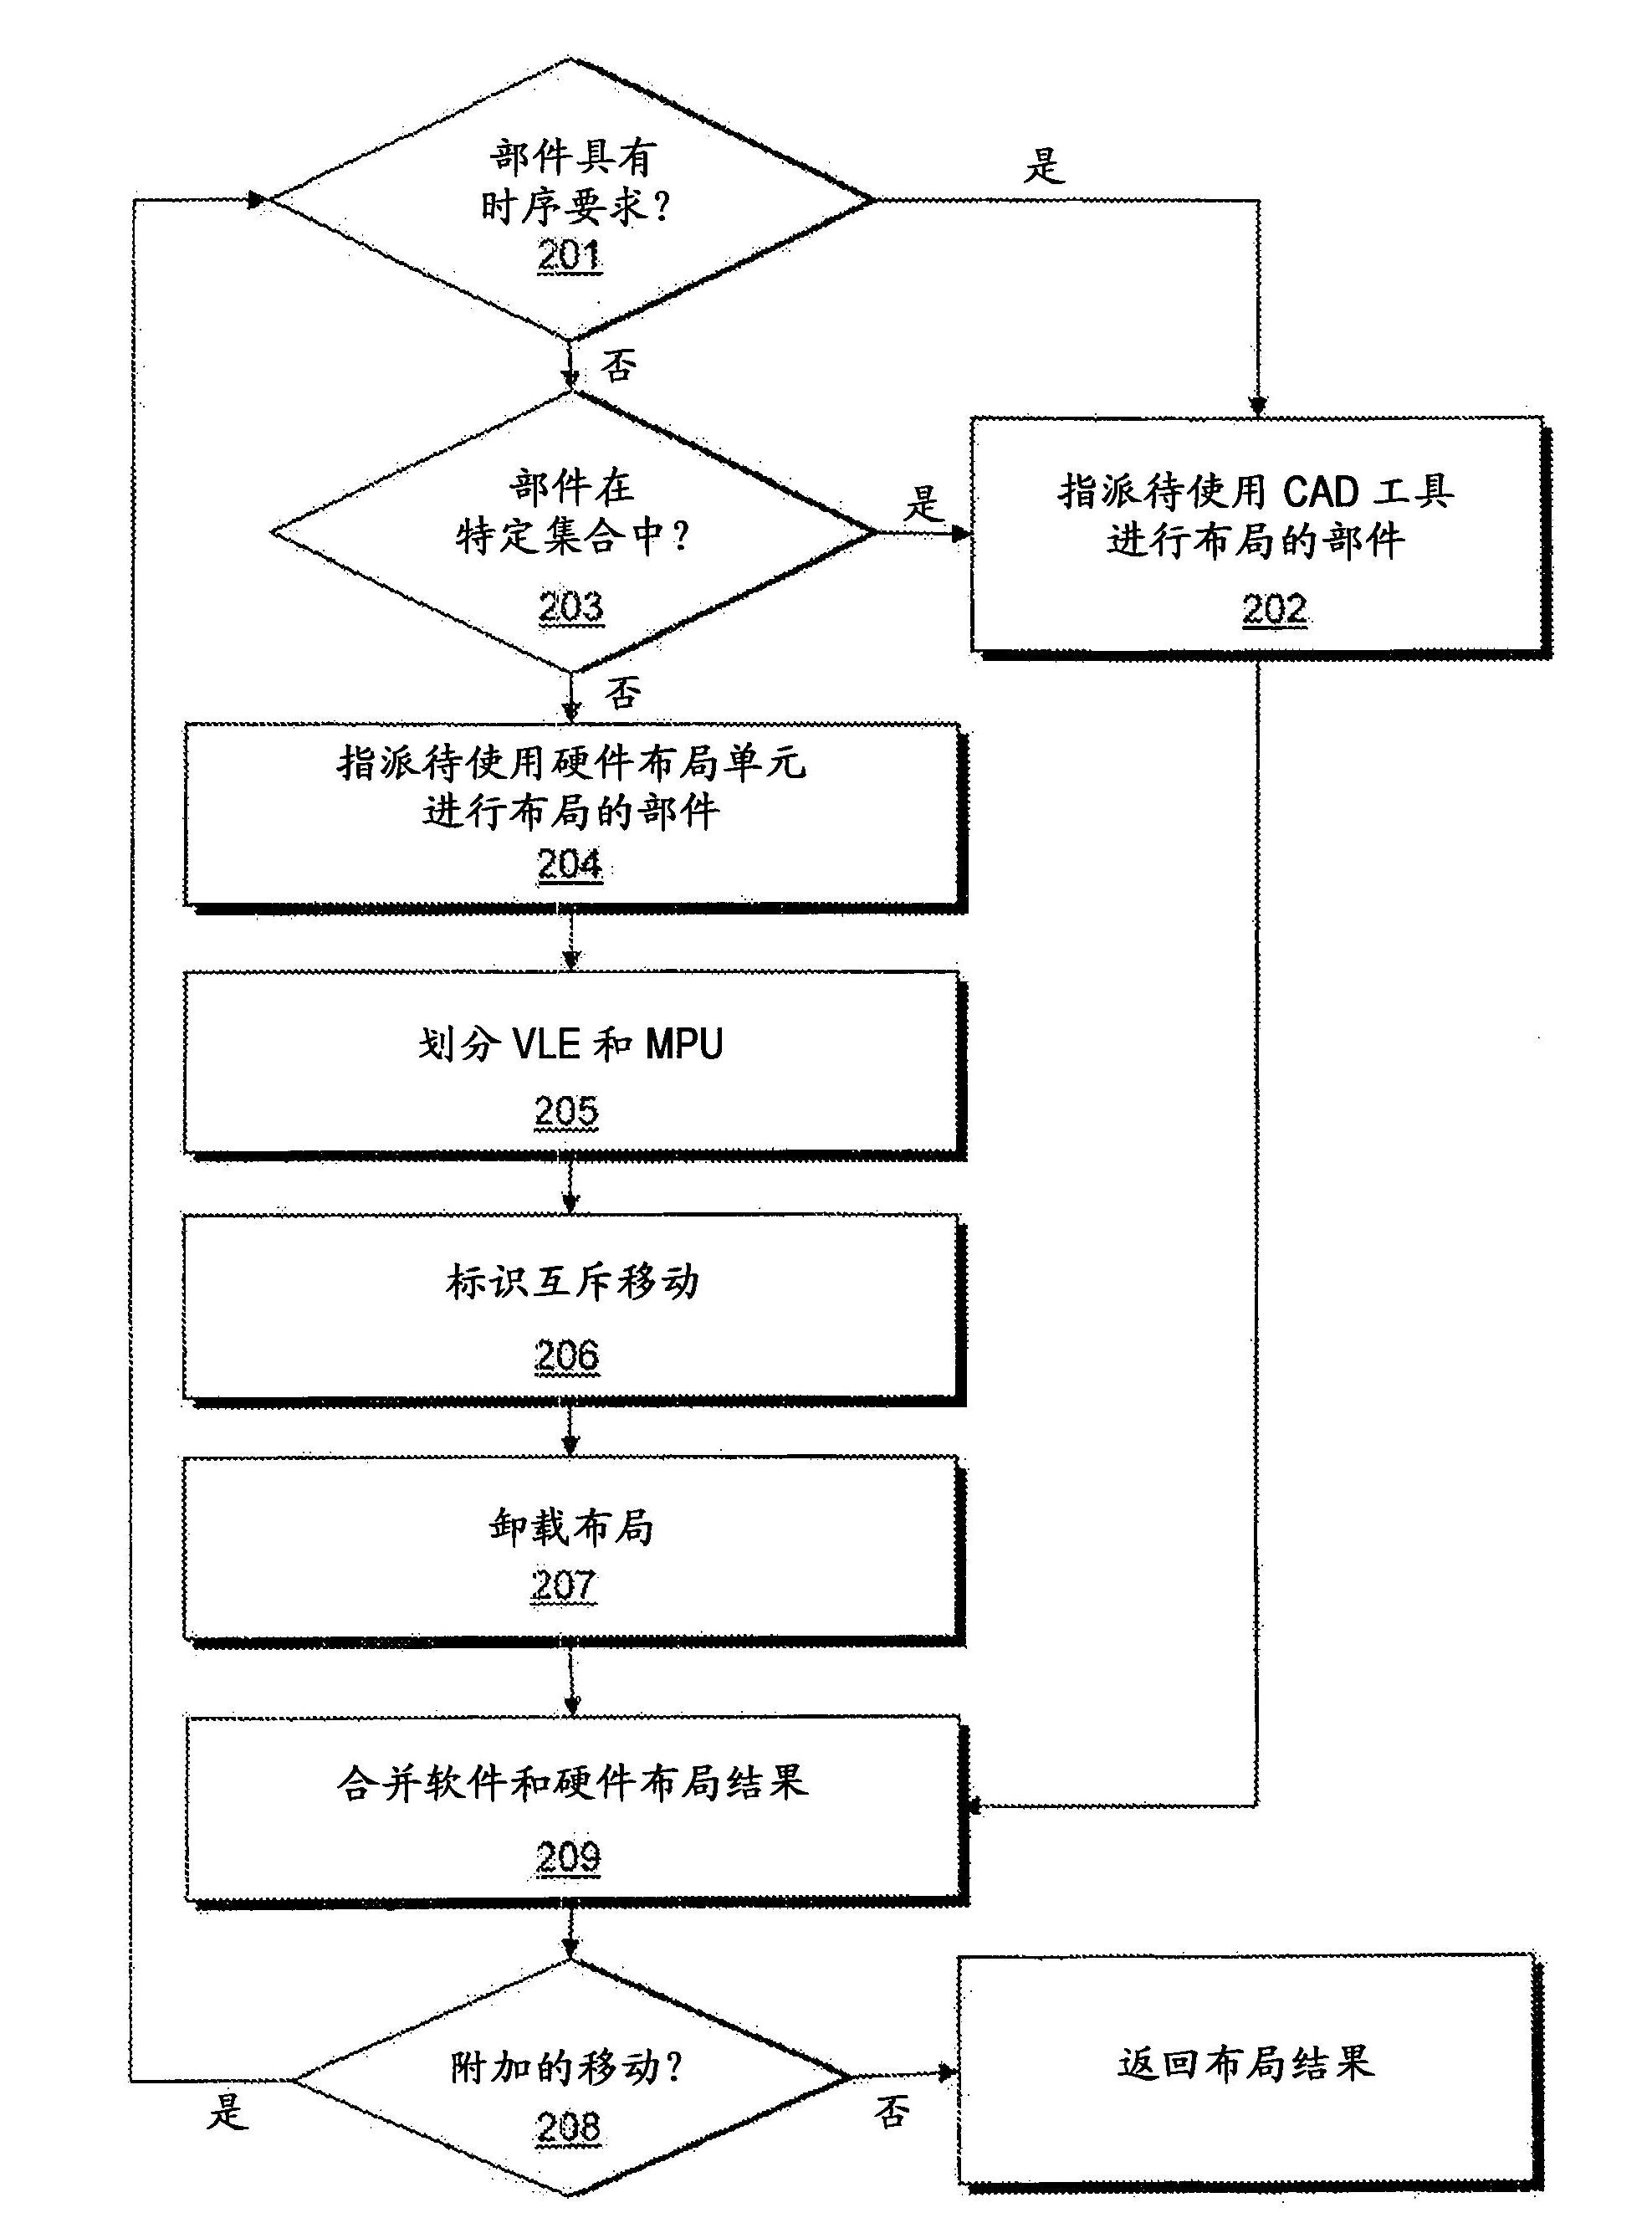 Method and apparatus for performing hardware assisted placement